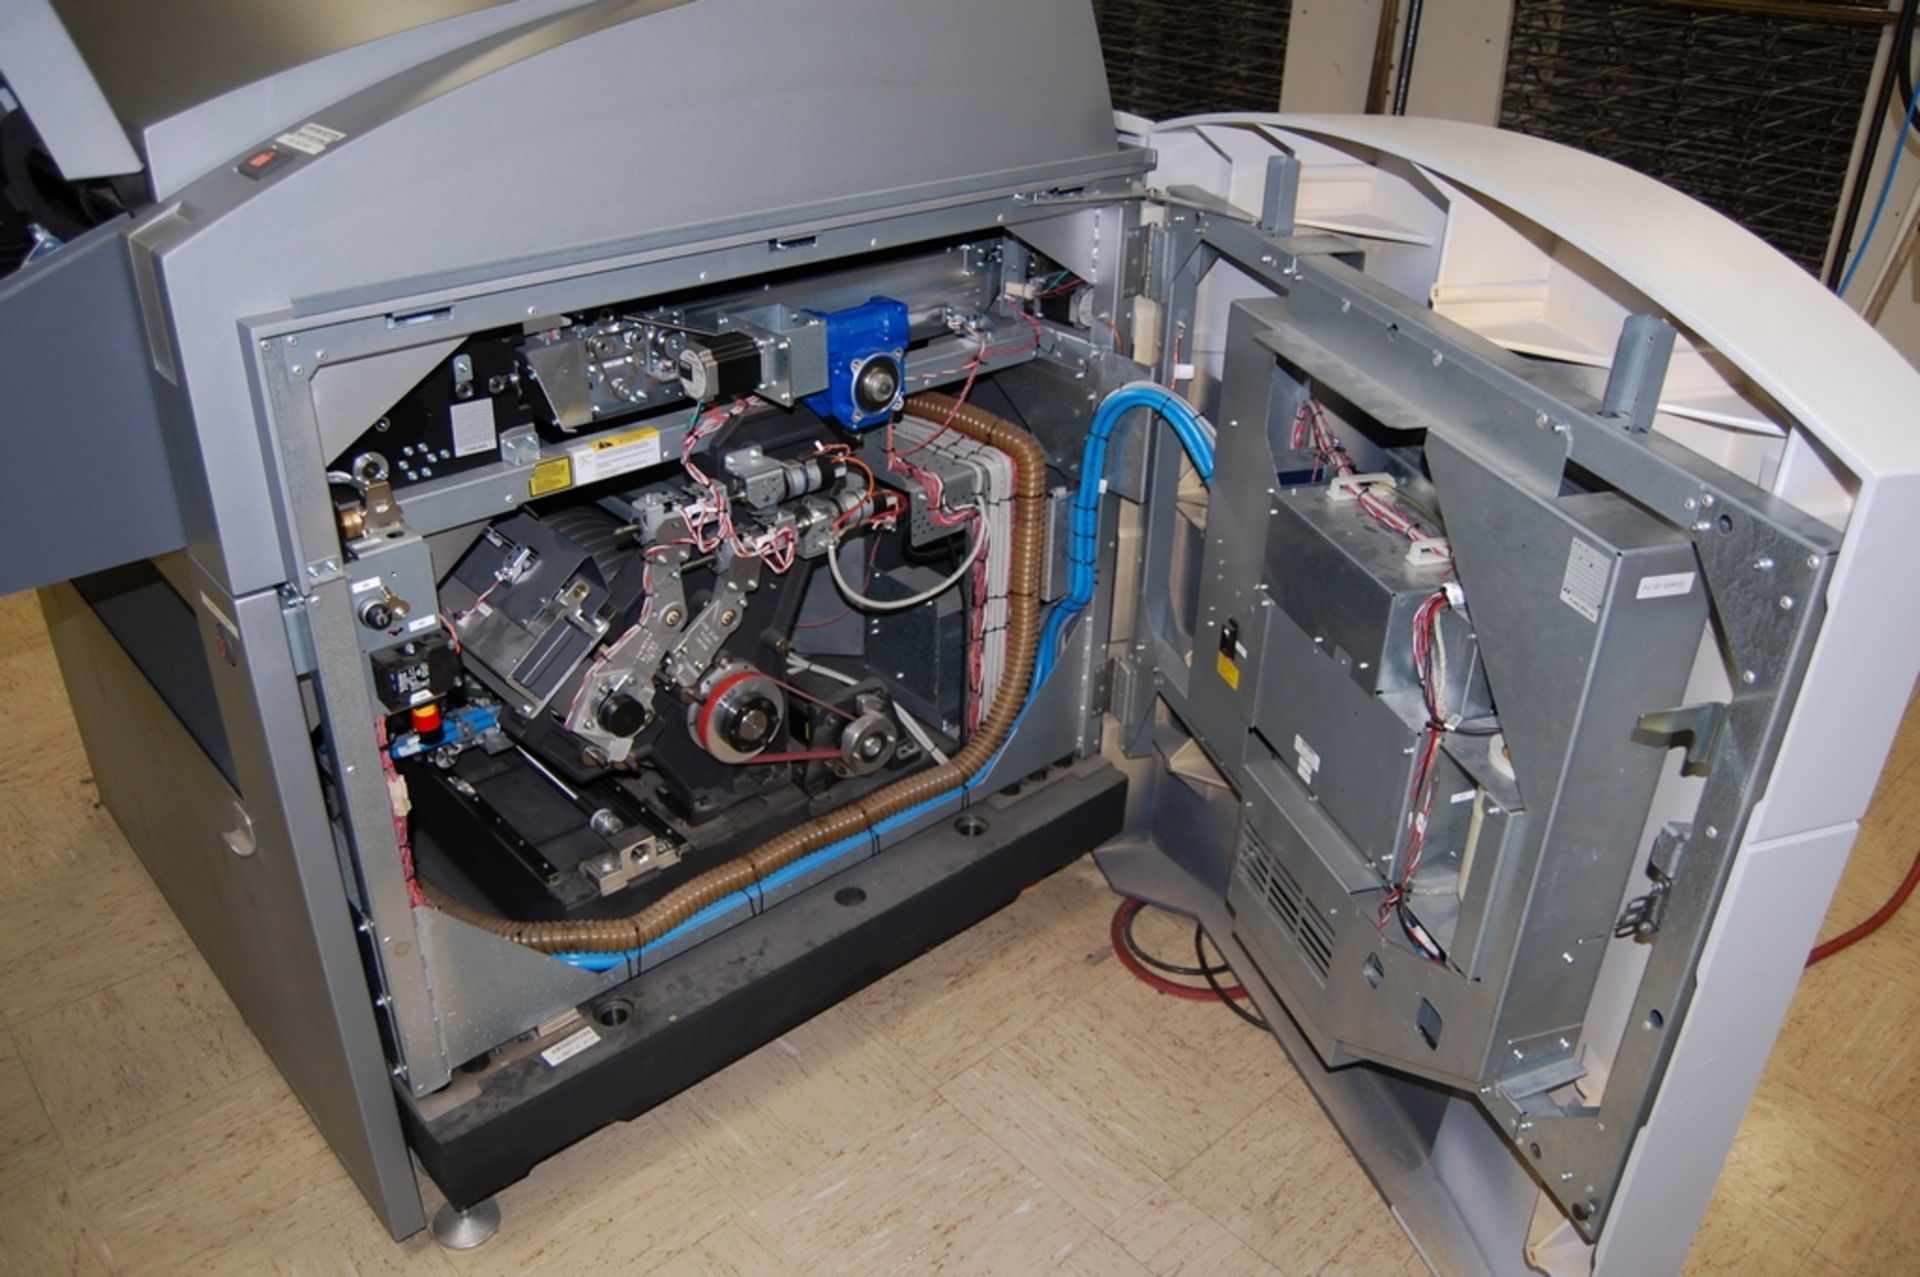 2008 Heidelberg Model Suprasetter A52/A74 Computer to Plate System - Image 13 of 20